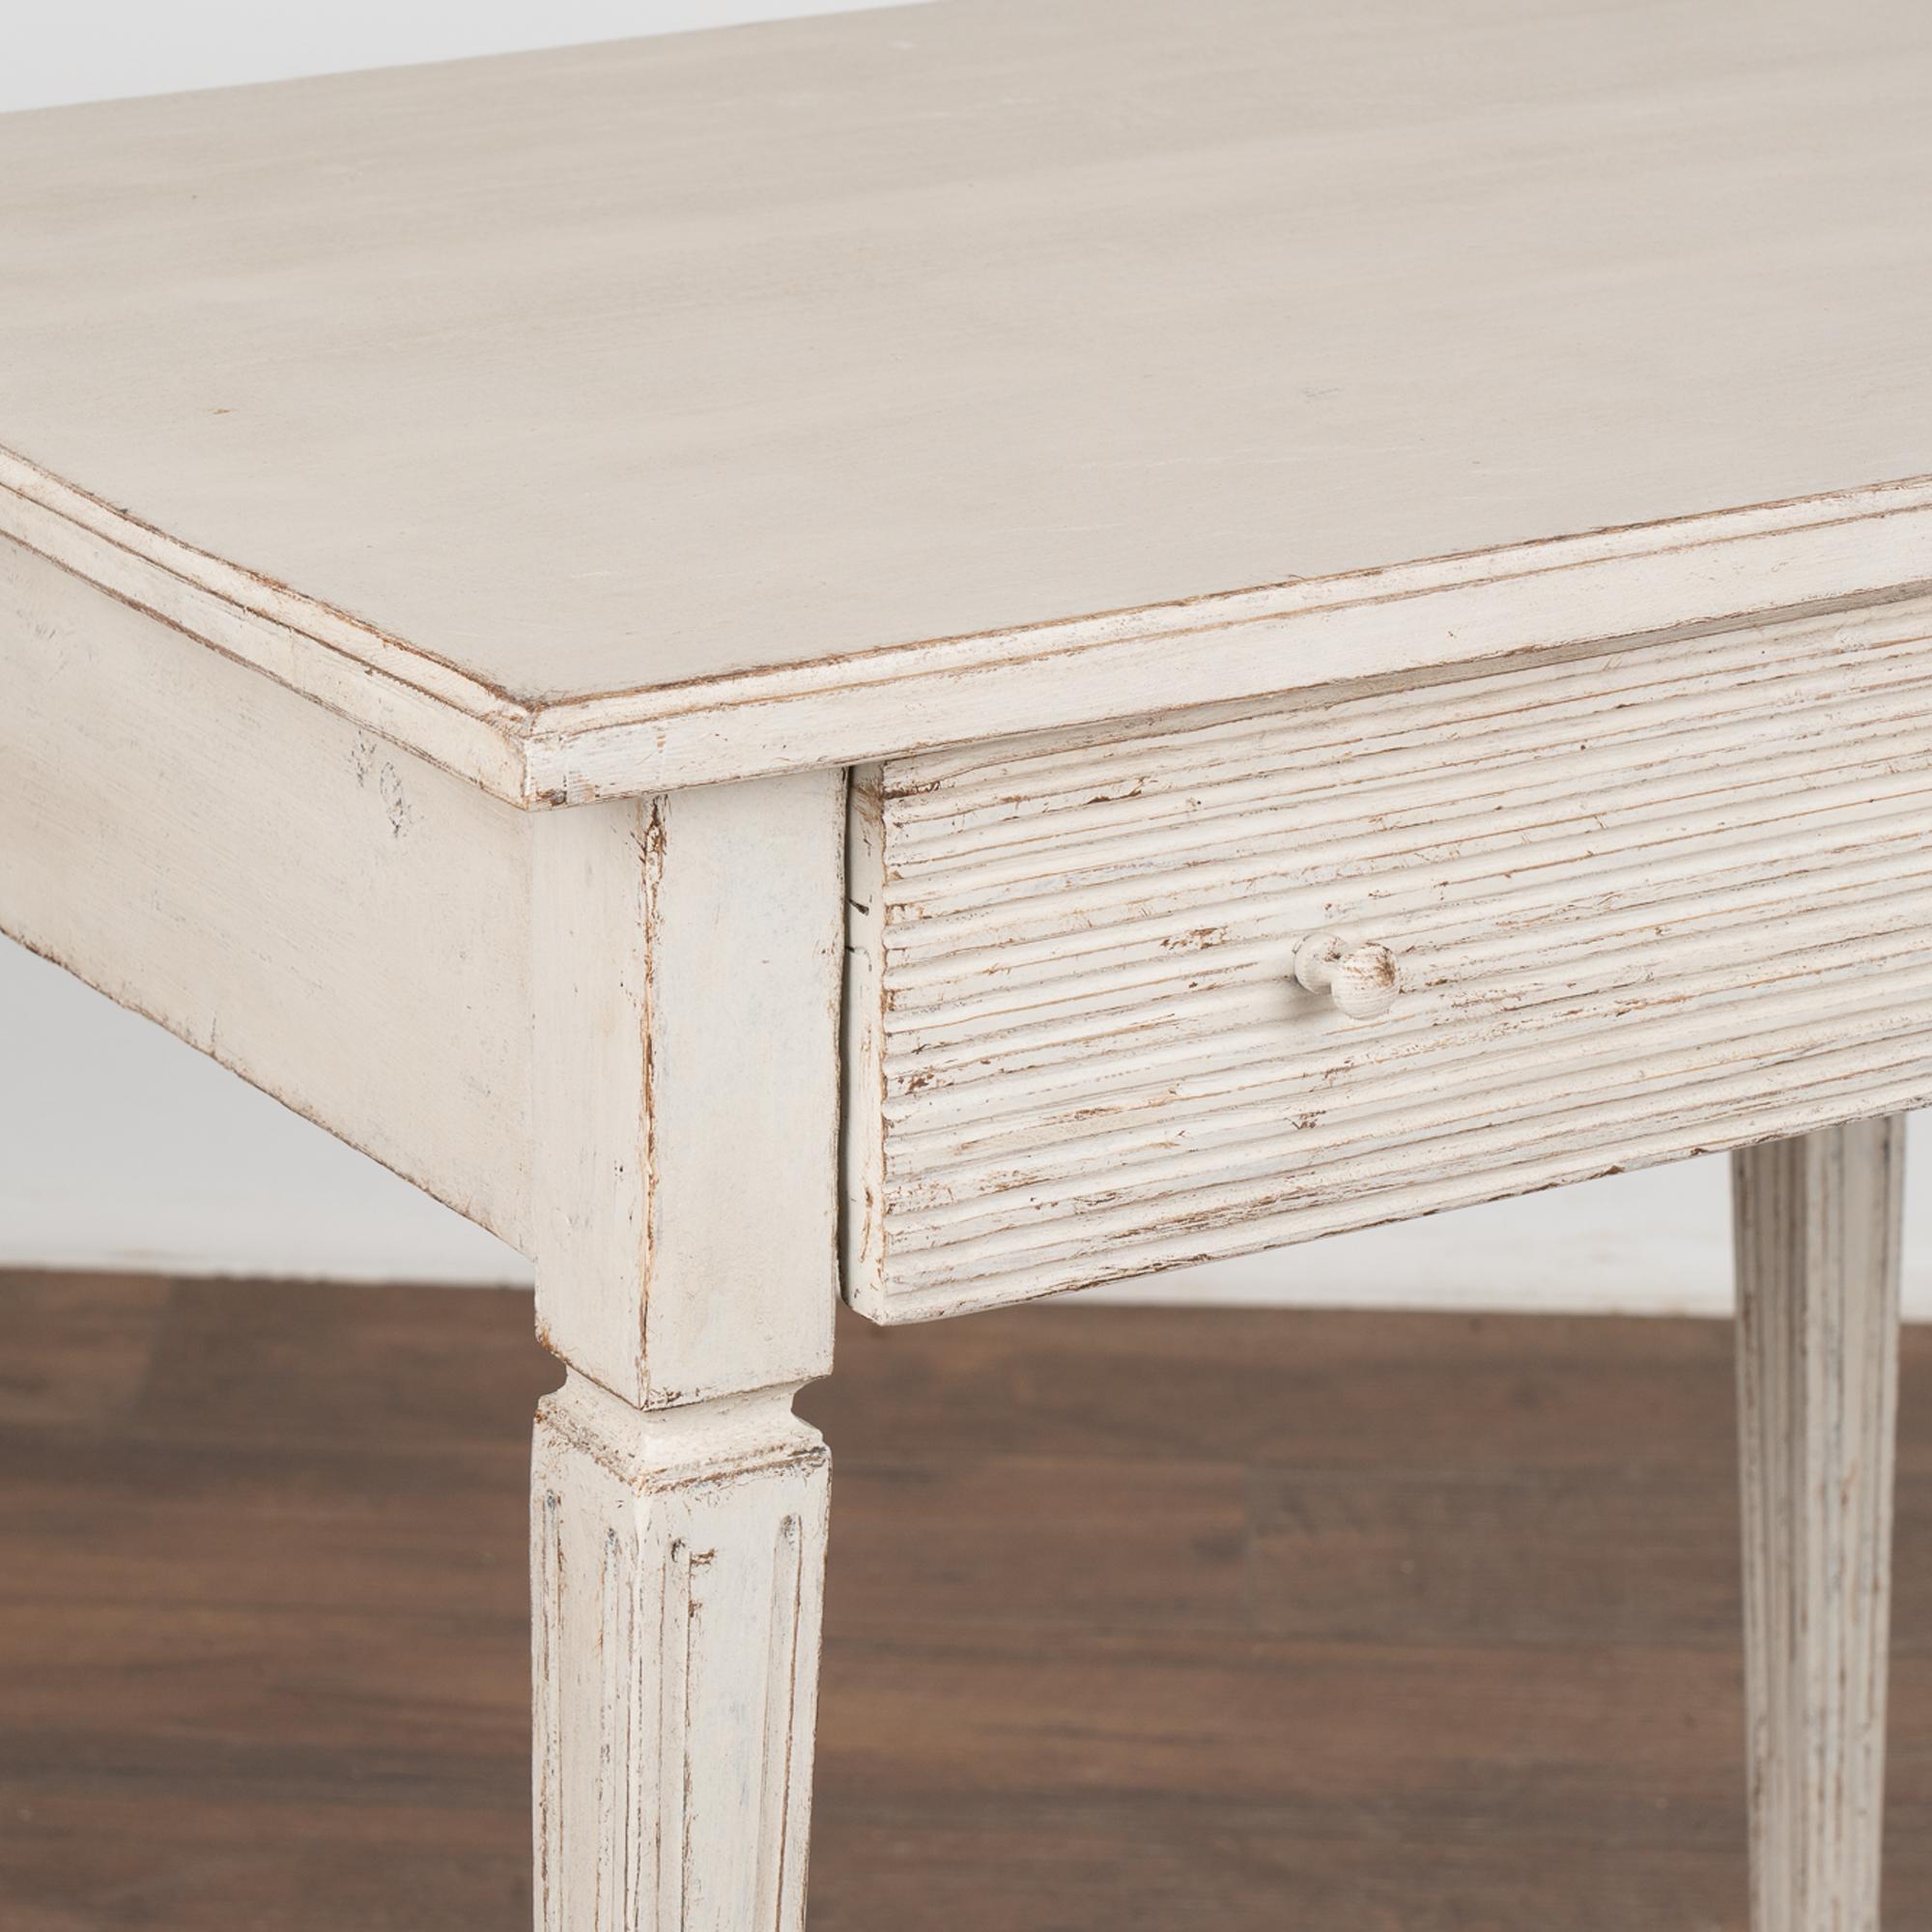 Wood White Gustavian Side Table with Drawer, Sweden, circa 1820-40